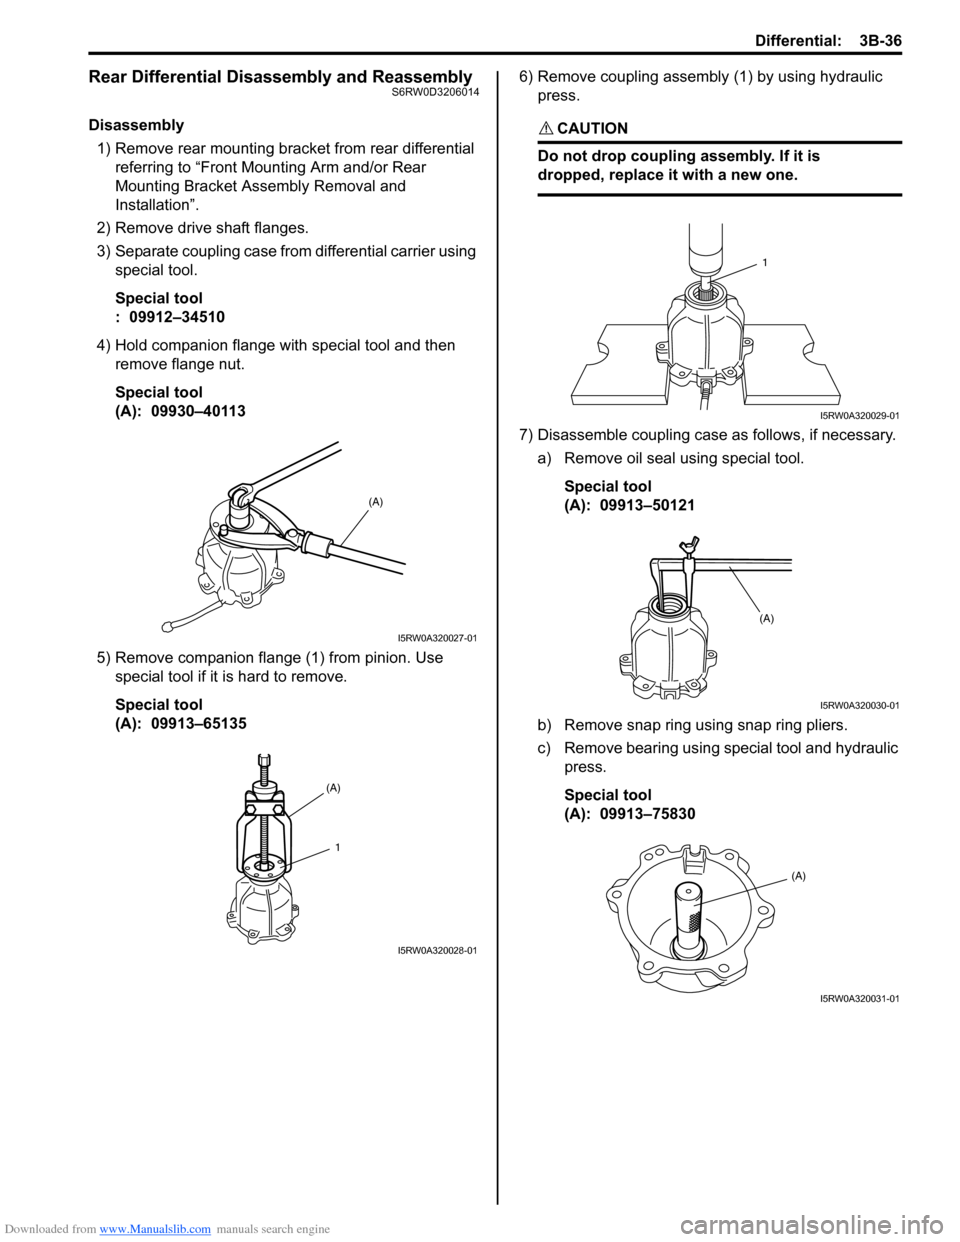 SUZUKI SX4 2006 1.G Service Workshop Manual Downloaded from www.Manualslib.com manuals search engine Differential: 3B-36
Rear Differential Disassembly and ReassemblyS6RW0D3206014
Disassembly
1) Remove rear mounting bracket from rear differentia